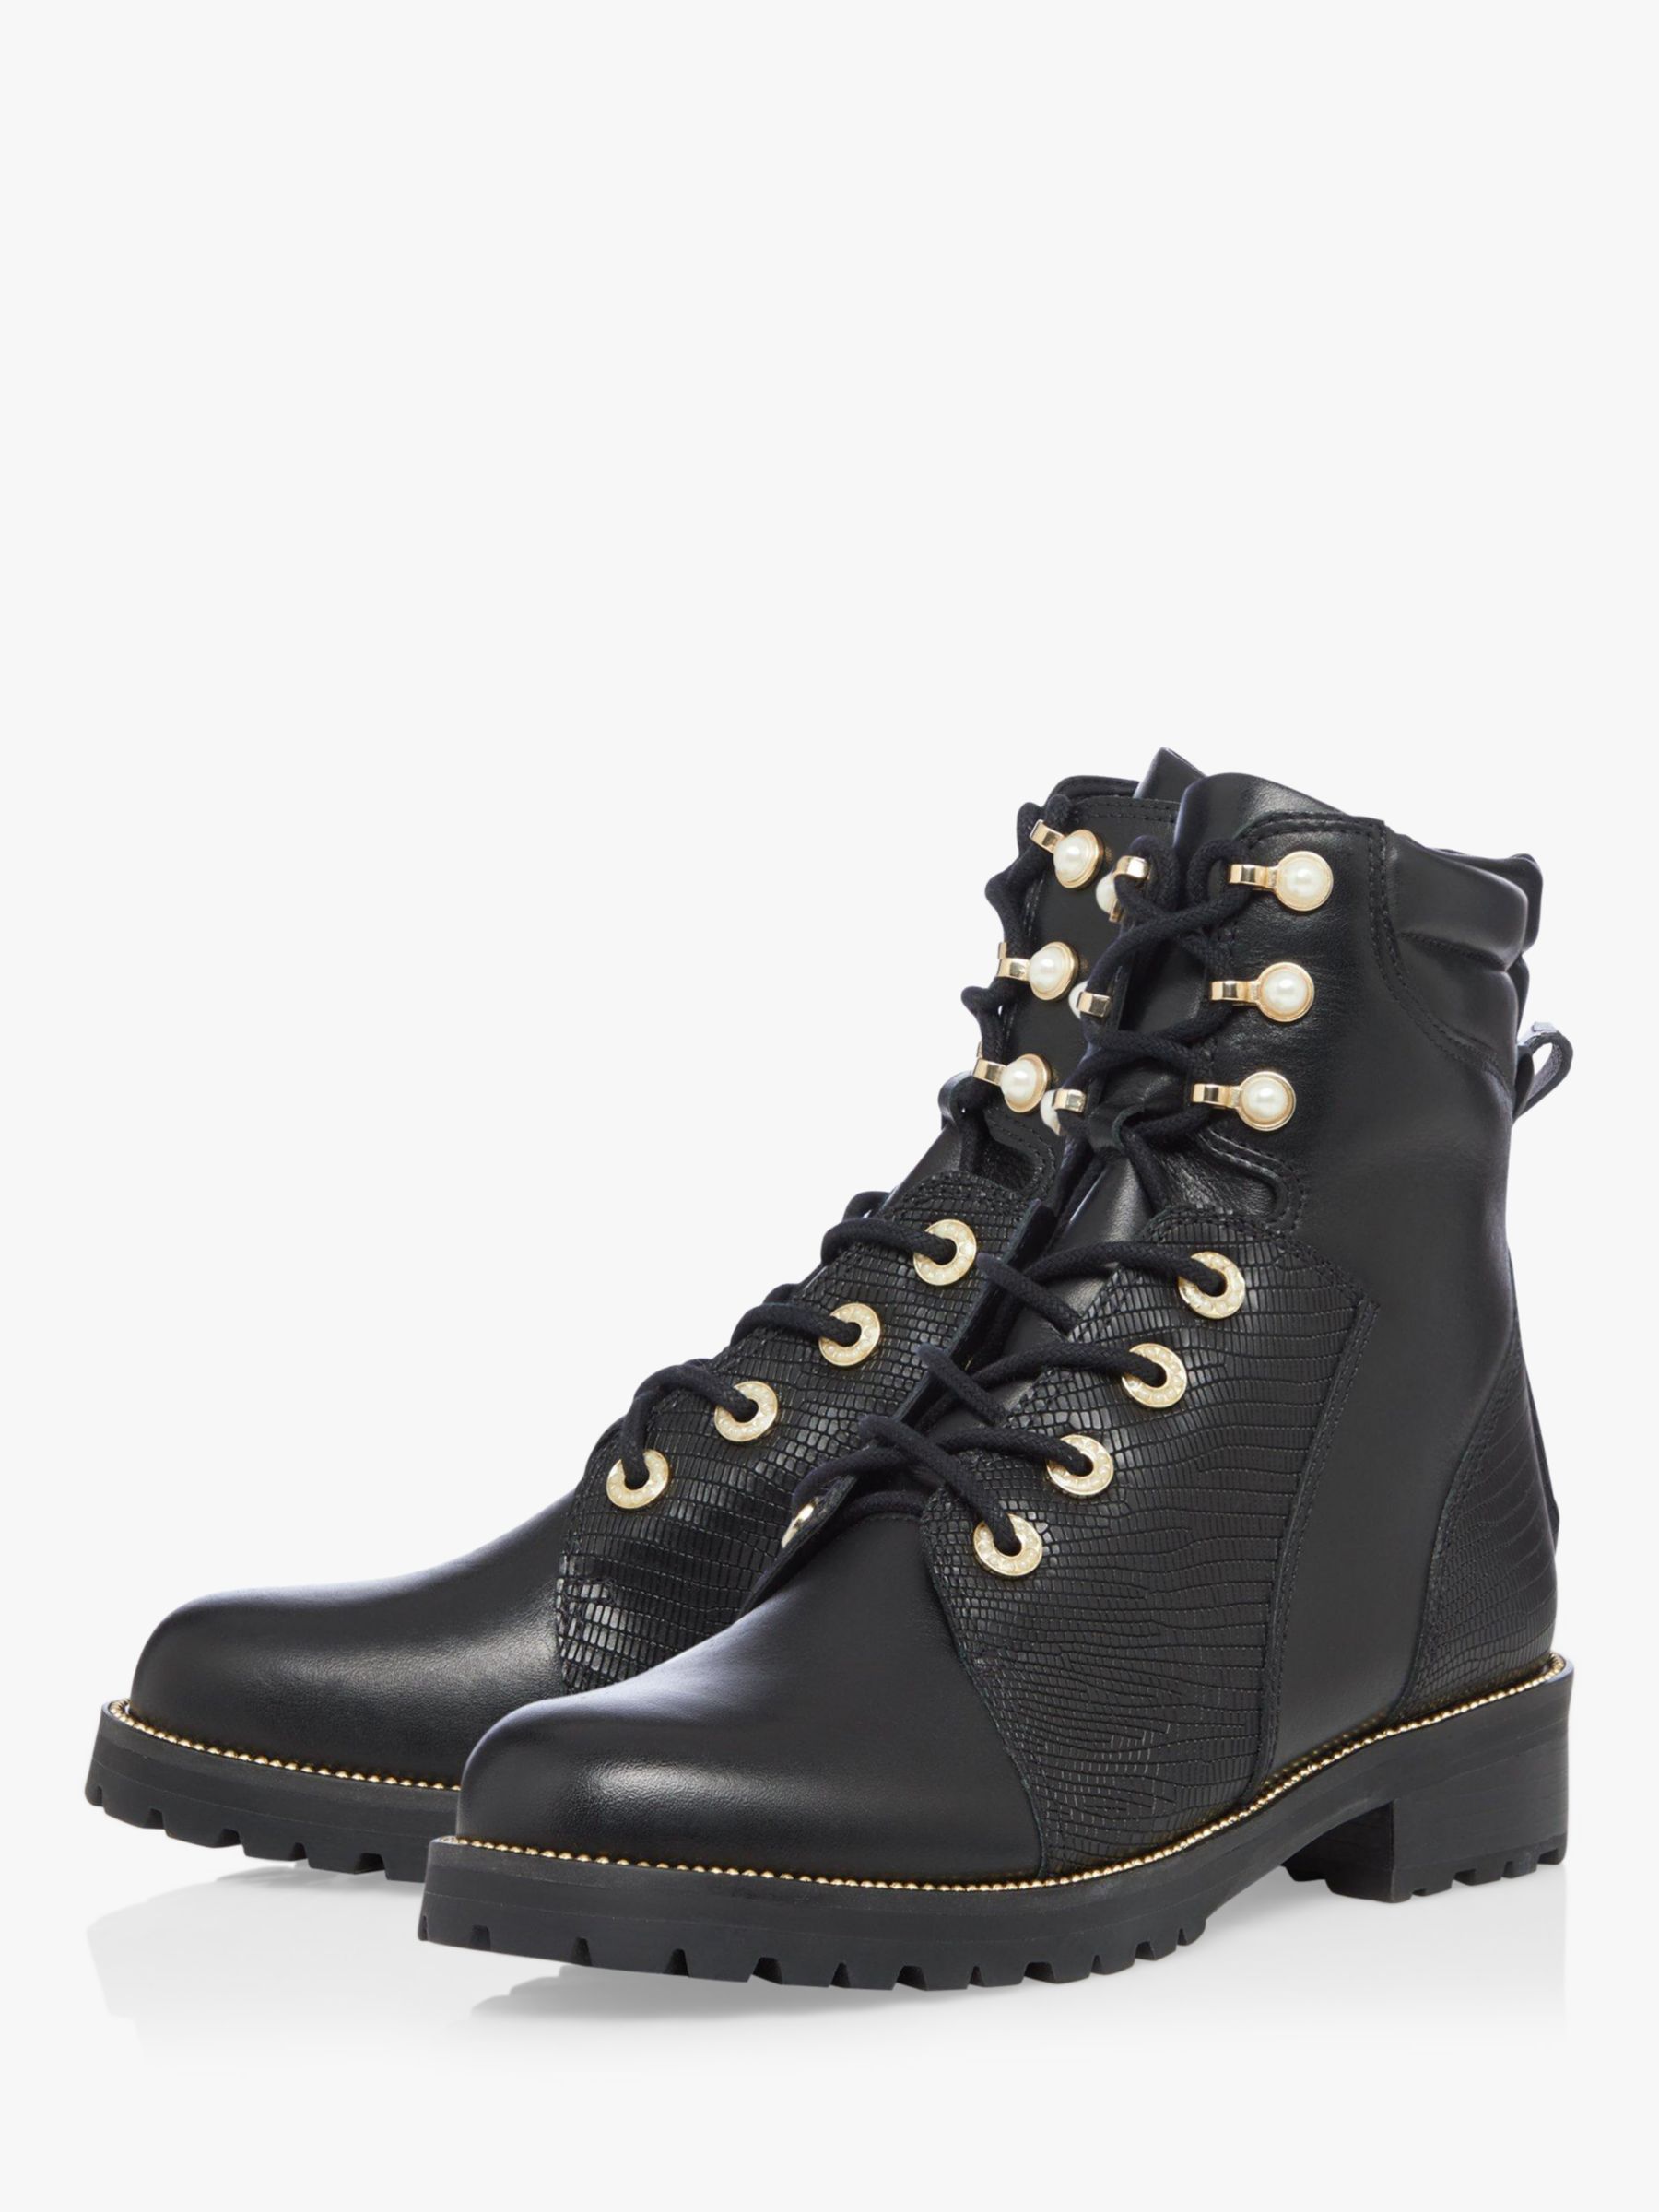 Buy Dune Wide Fit Pompom Faux Pearl Embellished Leather Ankle Boots Online at johnlewis.com